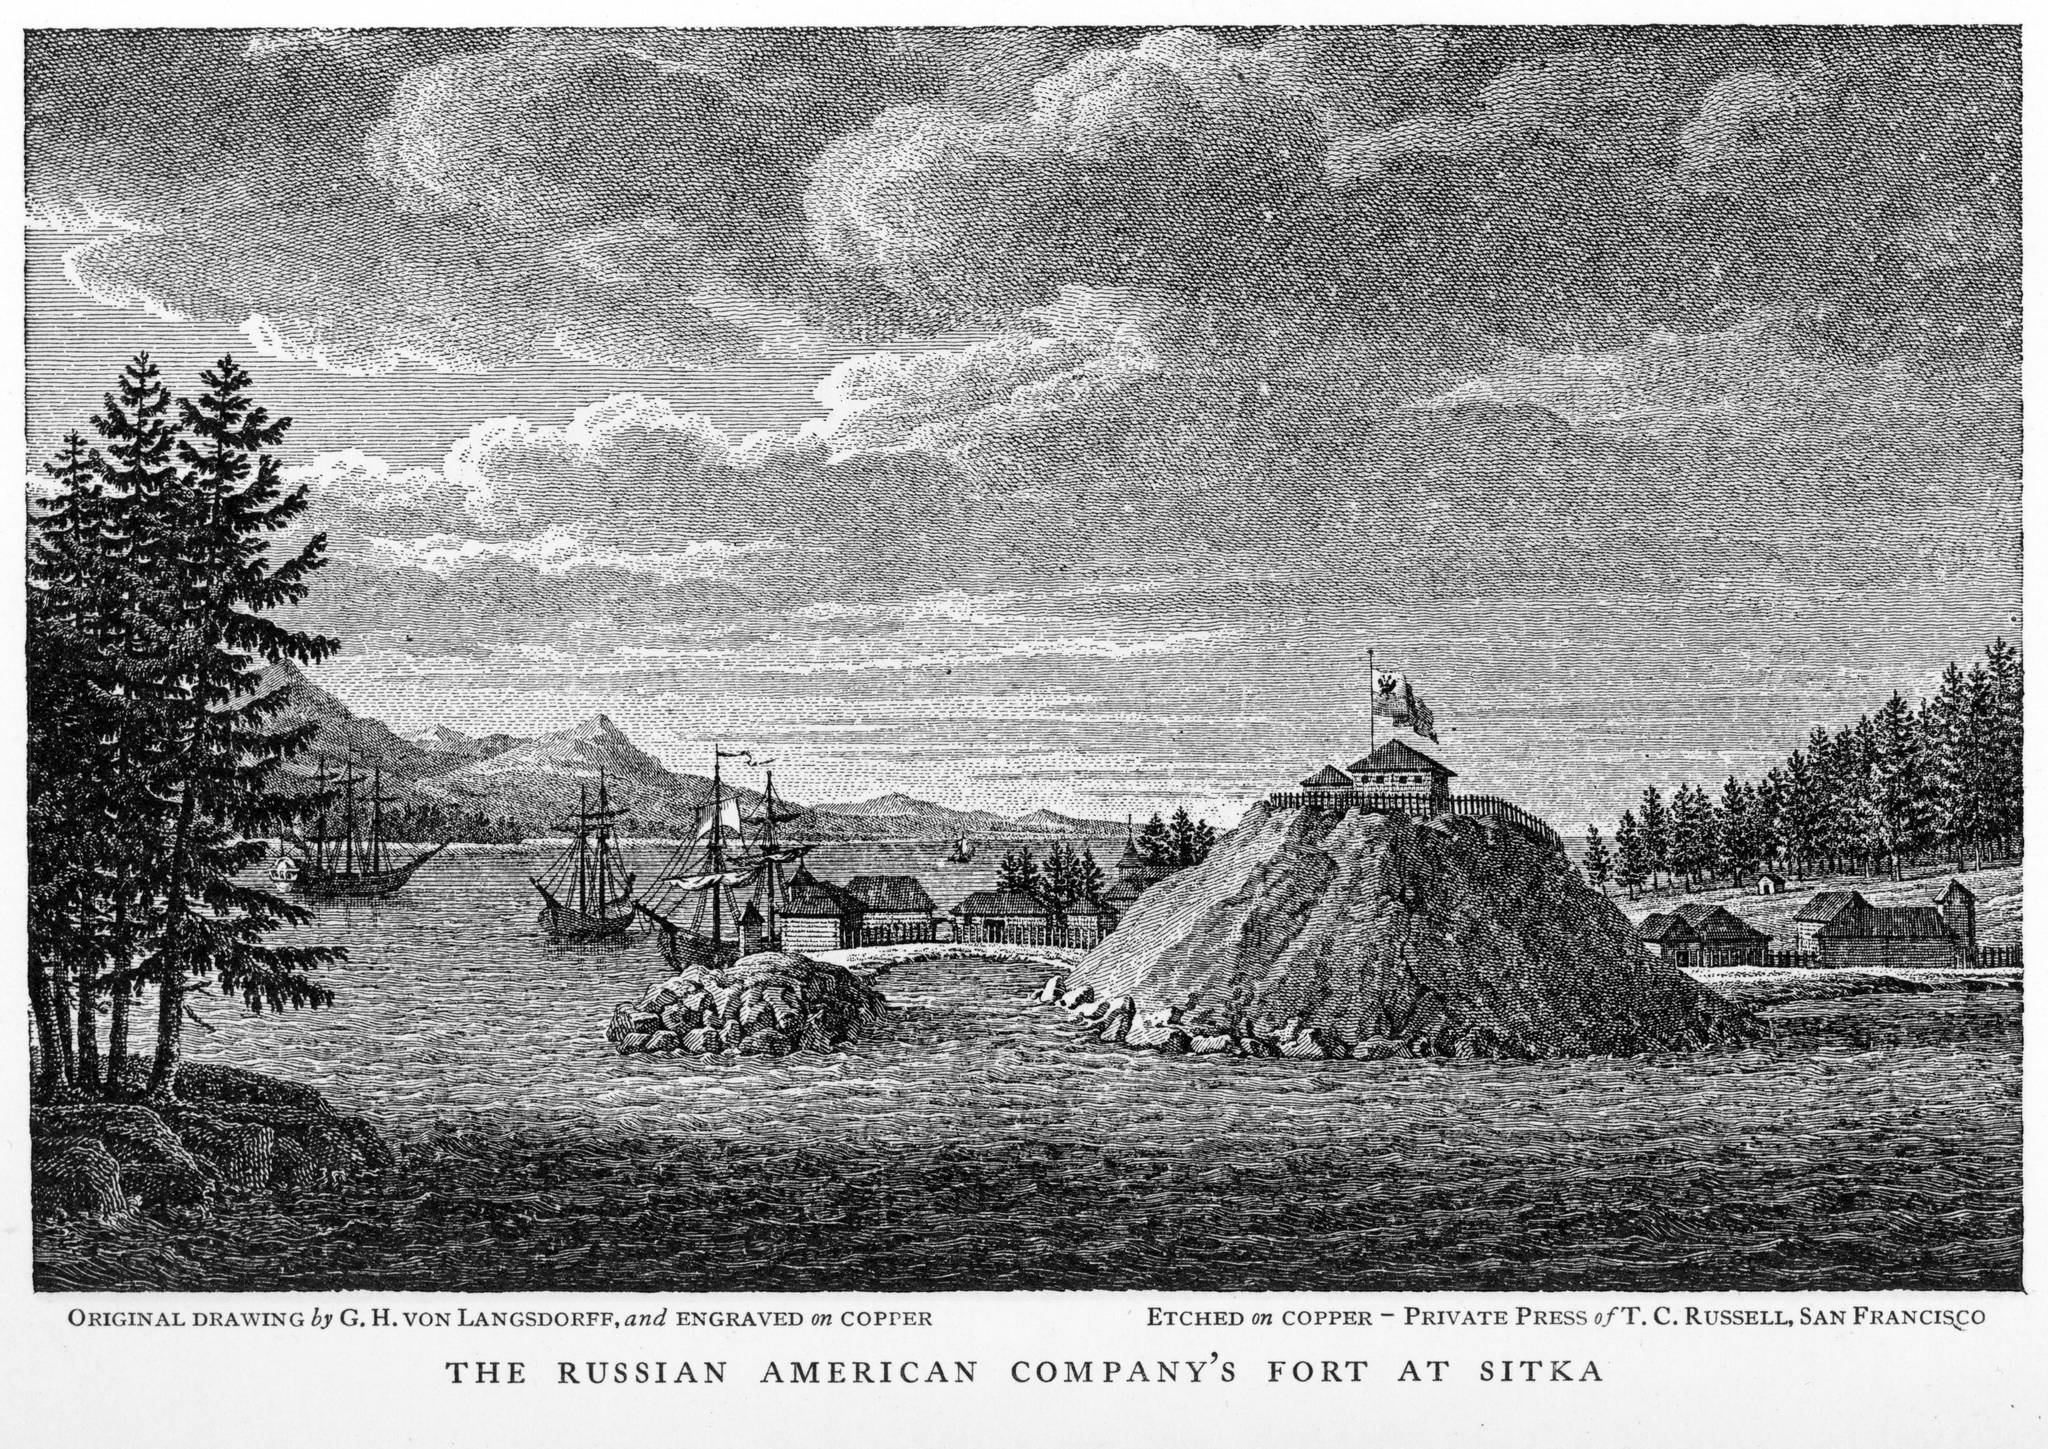 Drawing of Sitka in 1805. (Image courtesy of the Sitka History Museum)